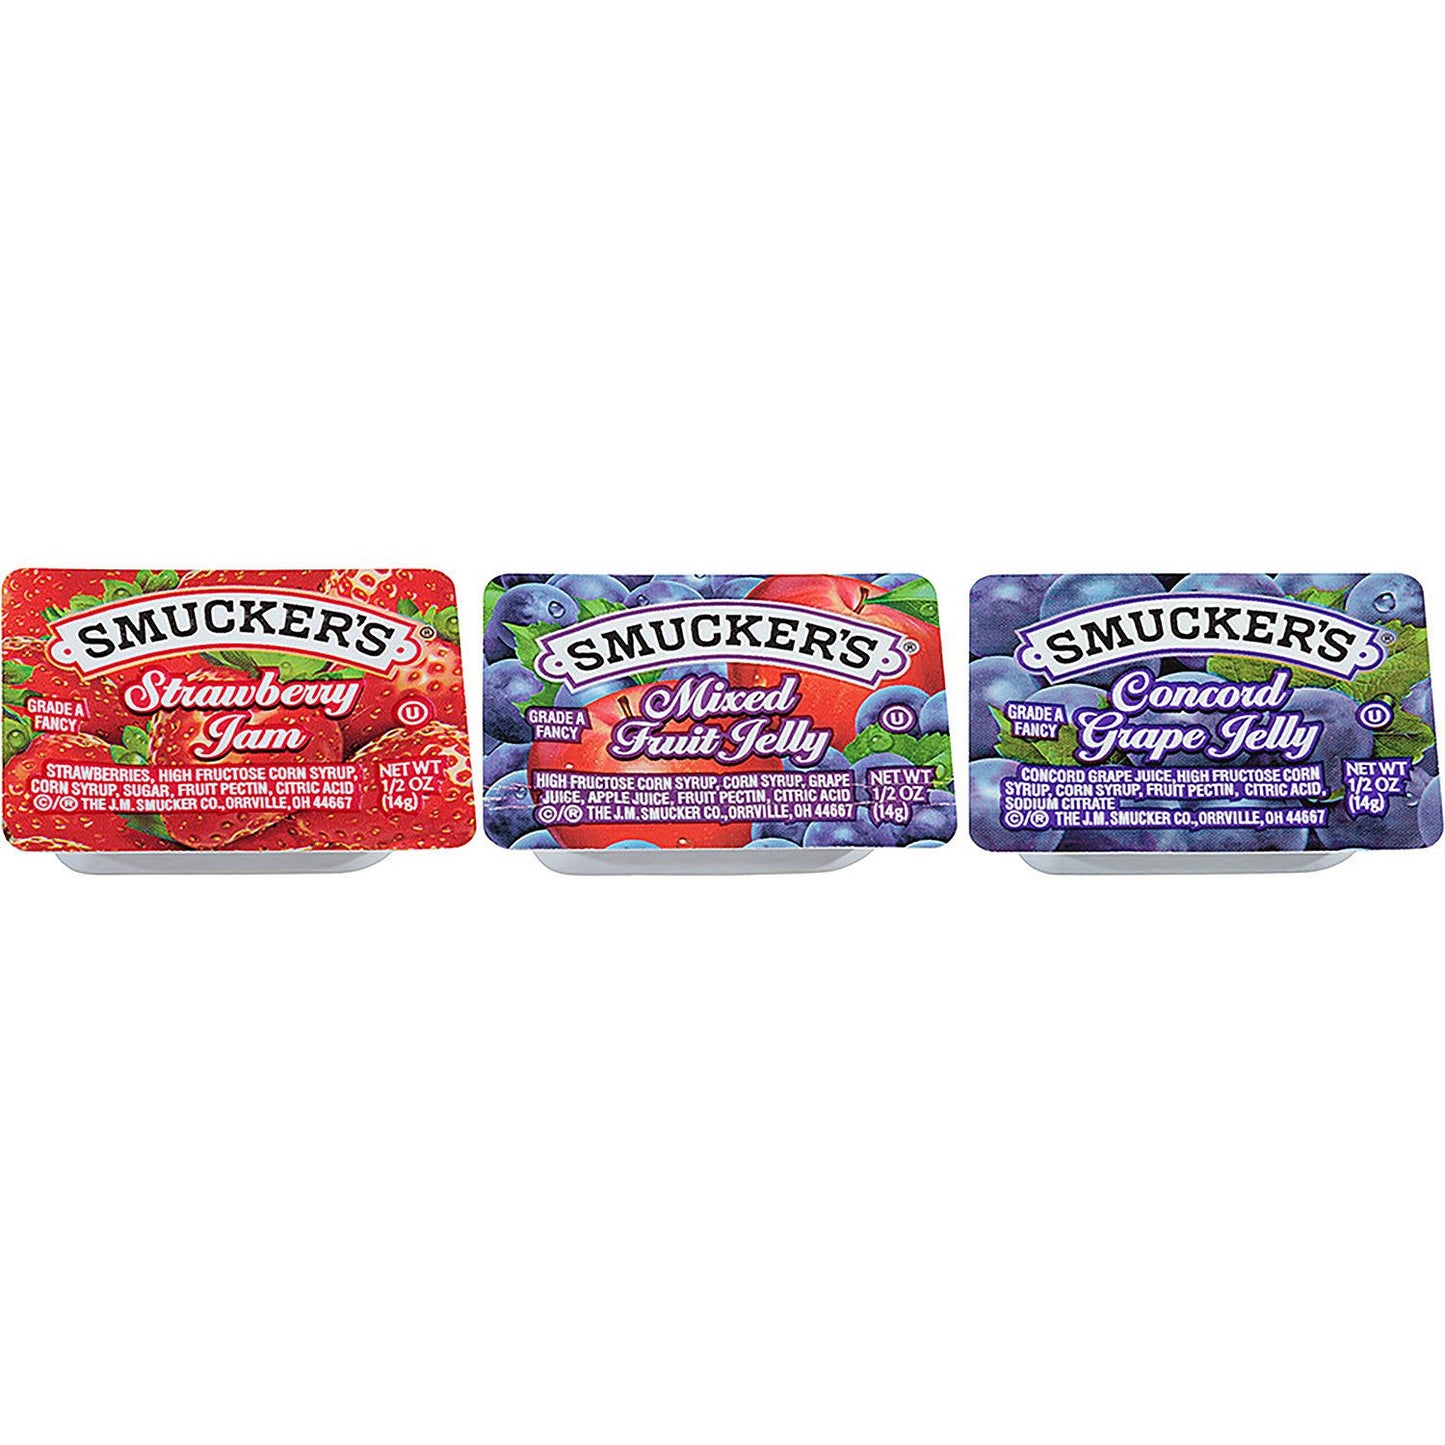 Smucker's Assorted Jelly Cups (0.5 oz., 200 ct.)